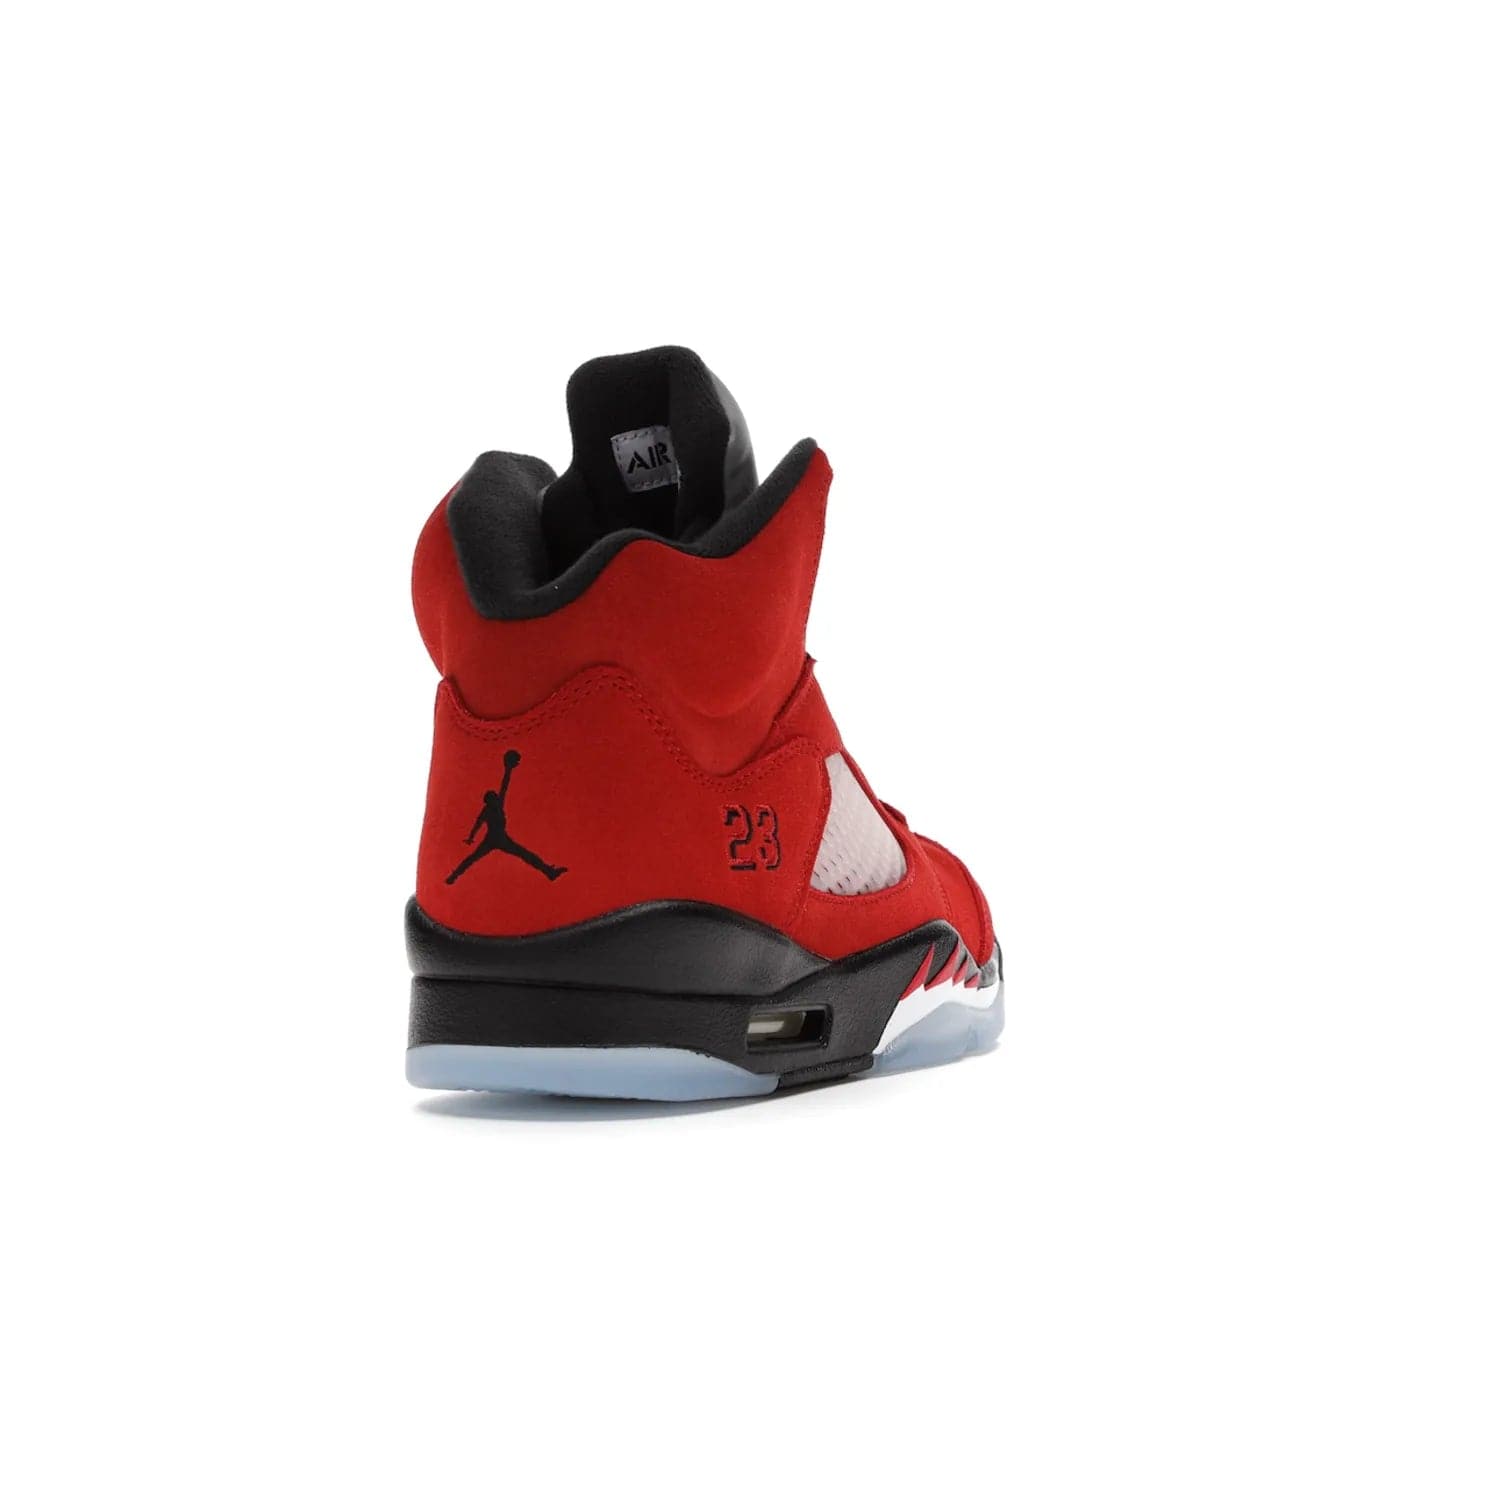 Jordan 5 Retro Raging Bull Red (2021) - Image 30 - Only at www.BallersClubKickz.com - Get ready for the 2021 stand-alone release of the Air Jordan 5 Raging Bulls! This all-suede upper combines luxe details like a Jumpman logo, red & black "23" embroidery and shark tooth detailing, atop a black midsole. Don't miss out - release date in April 2021 for $190.